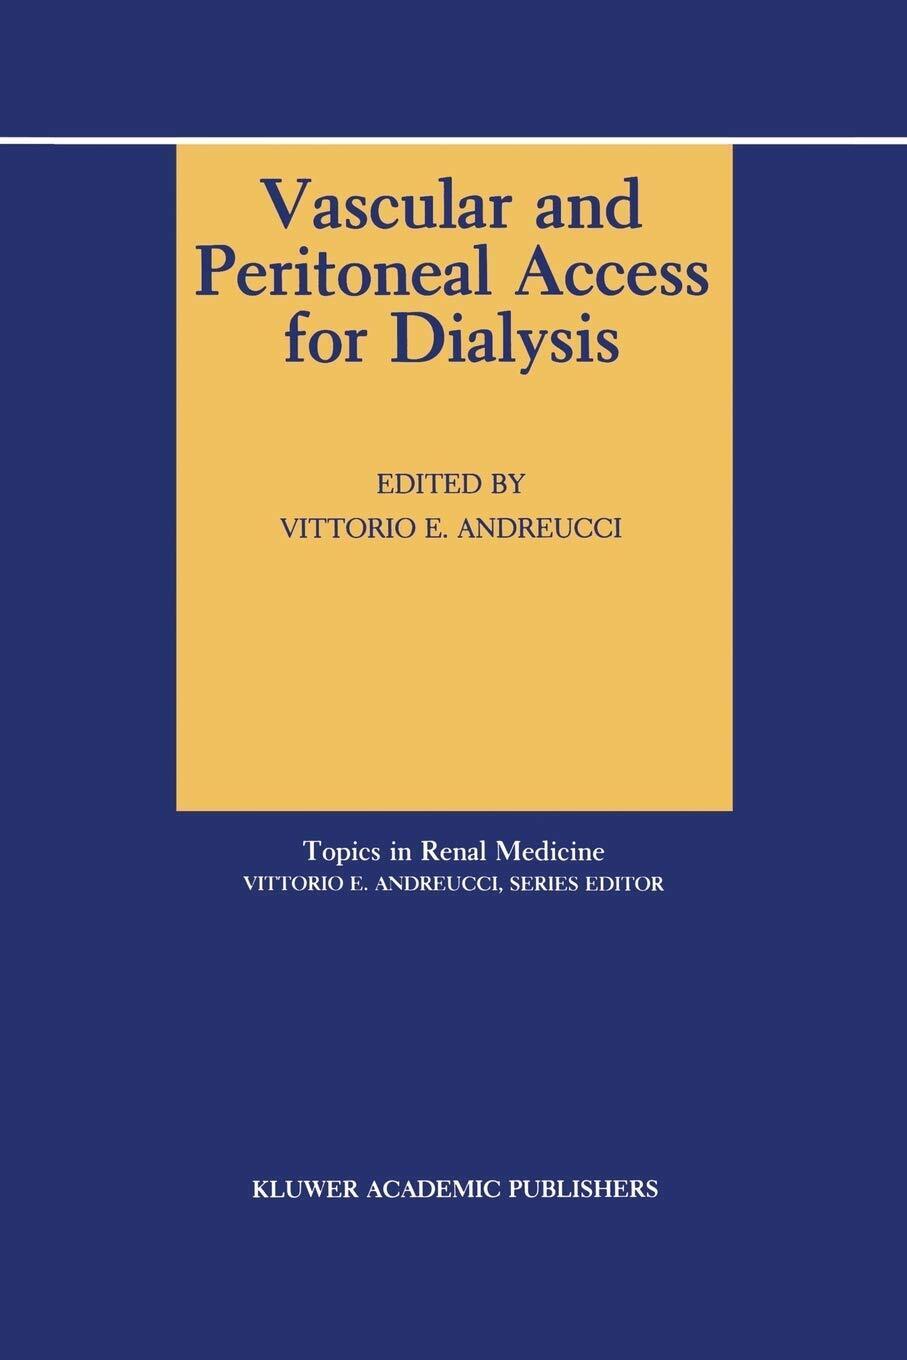 Vascular and Peritoneal Access for Dialysis - V.E. Andreucci - Springer, 2013